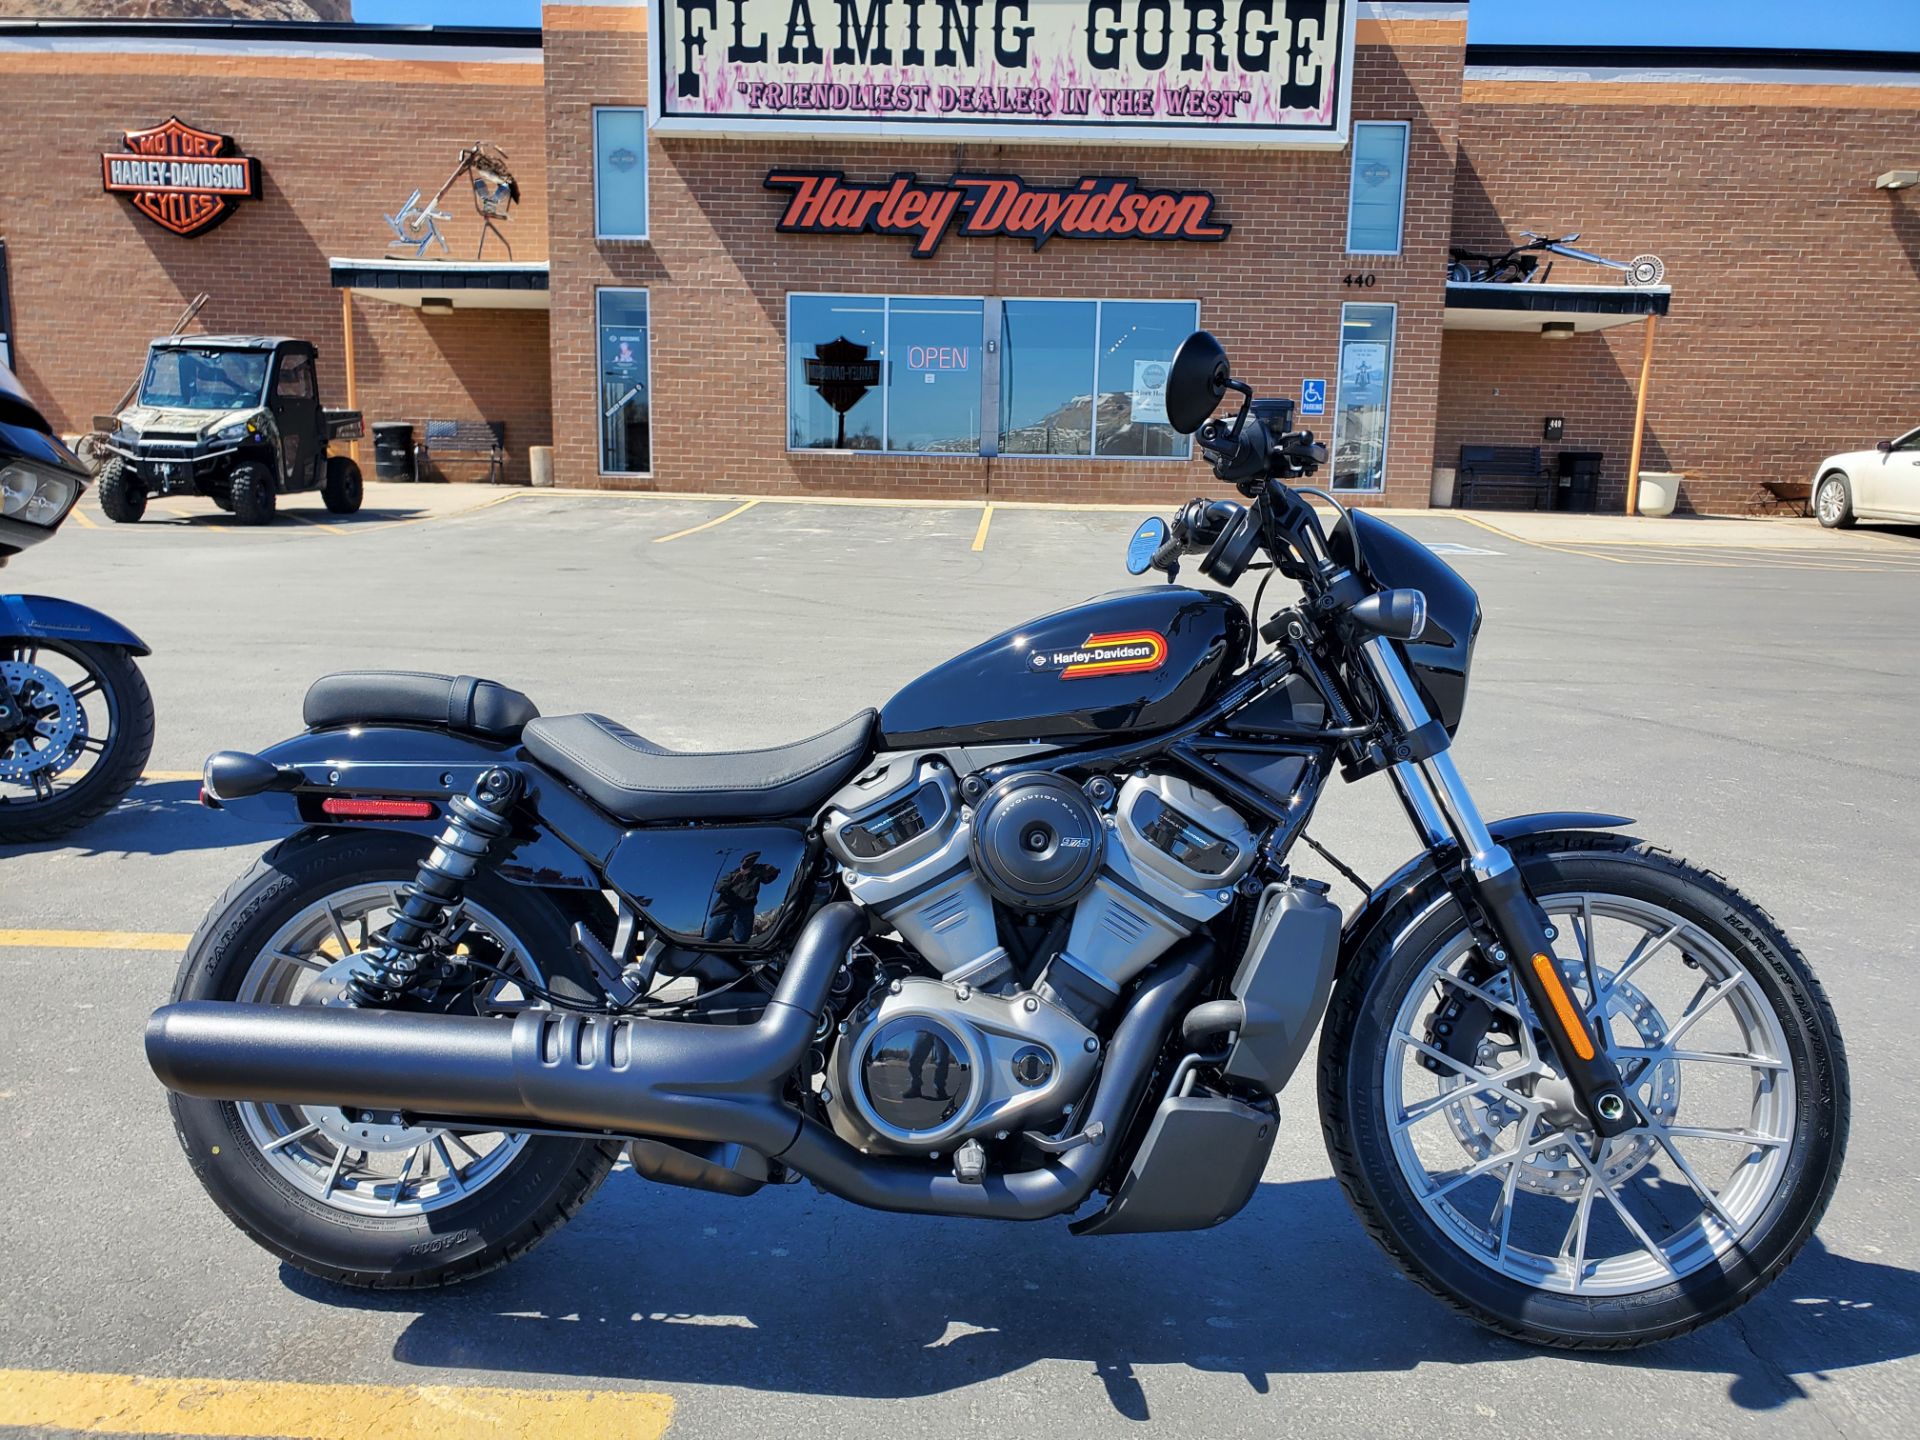 2023 Harley-Davidson Nightster® Special in Green River, Wyoming - Photo 1